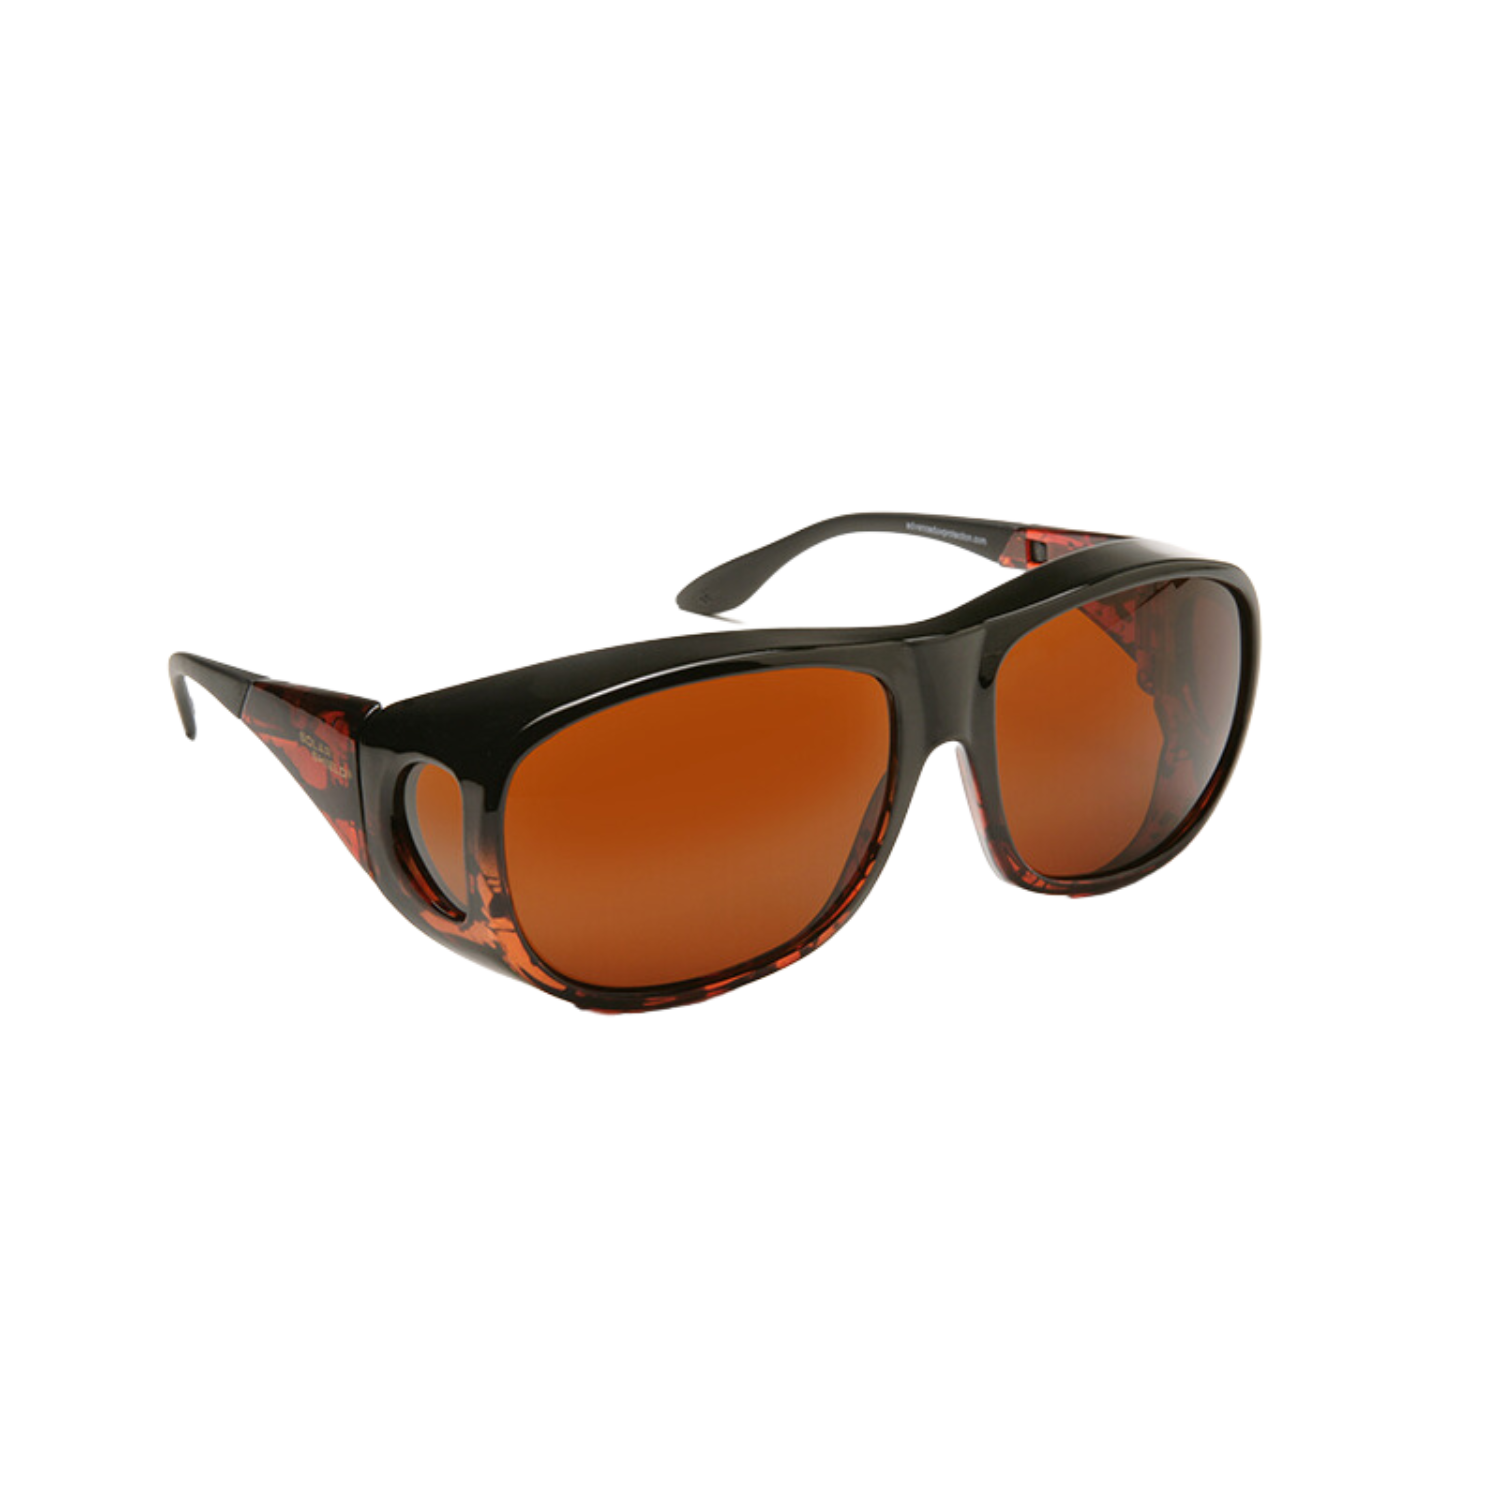 Image of the Solar Shield® Blue Light Filtering Sunglasses with Amber Tint from Eschenbach.